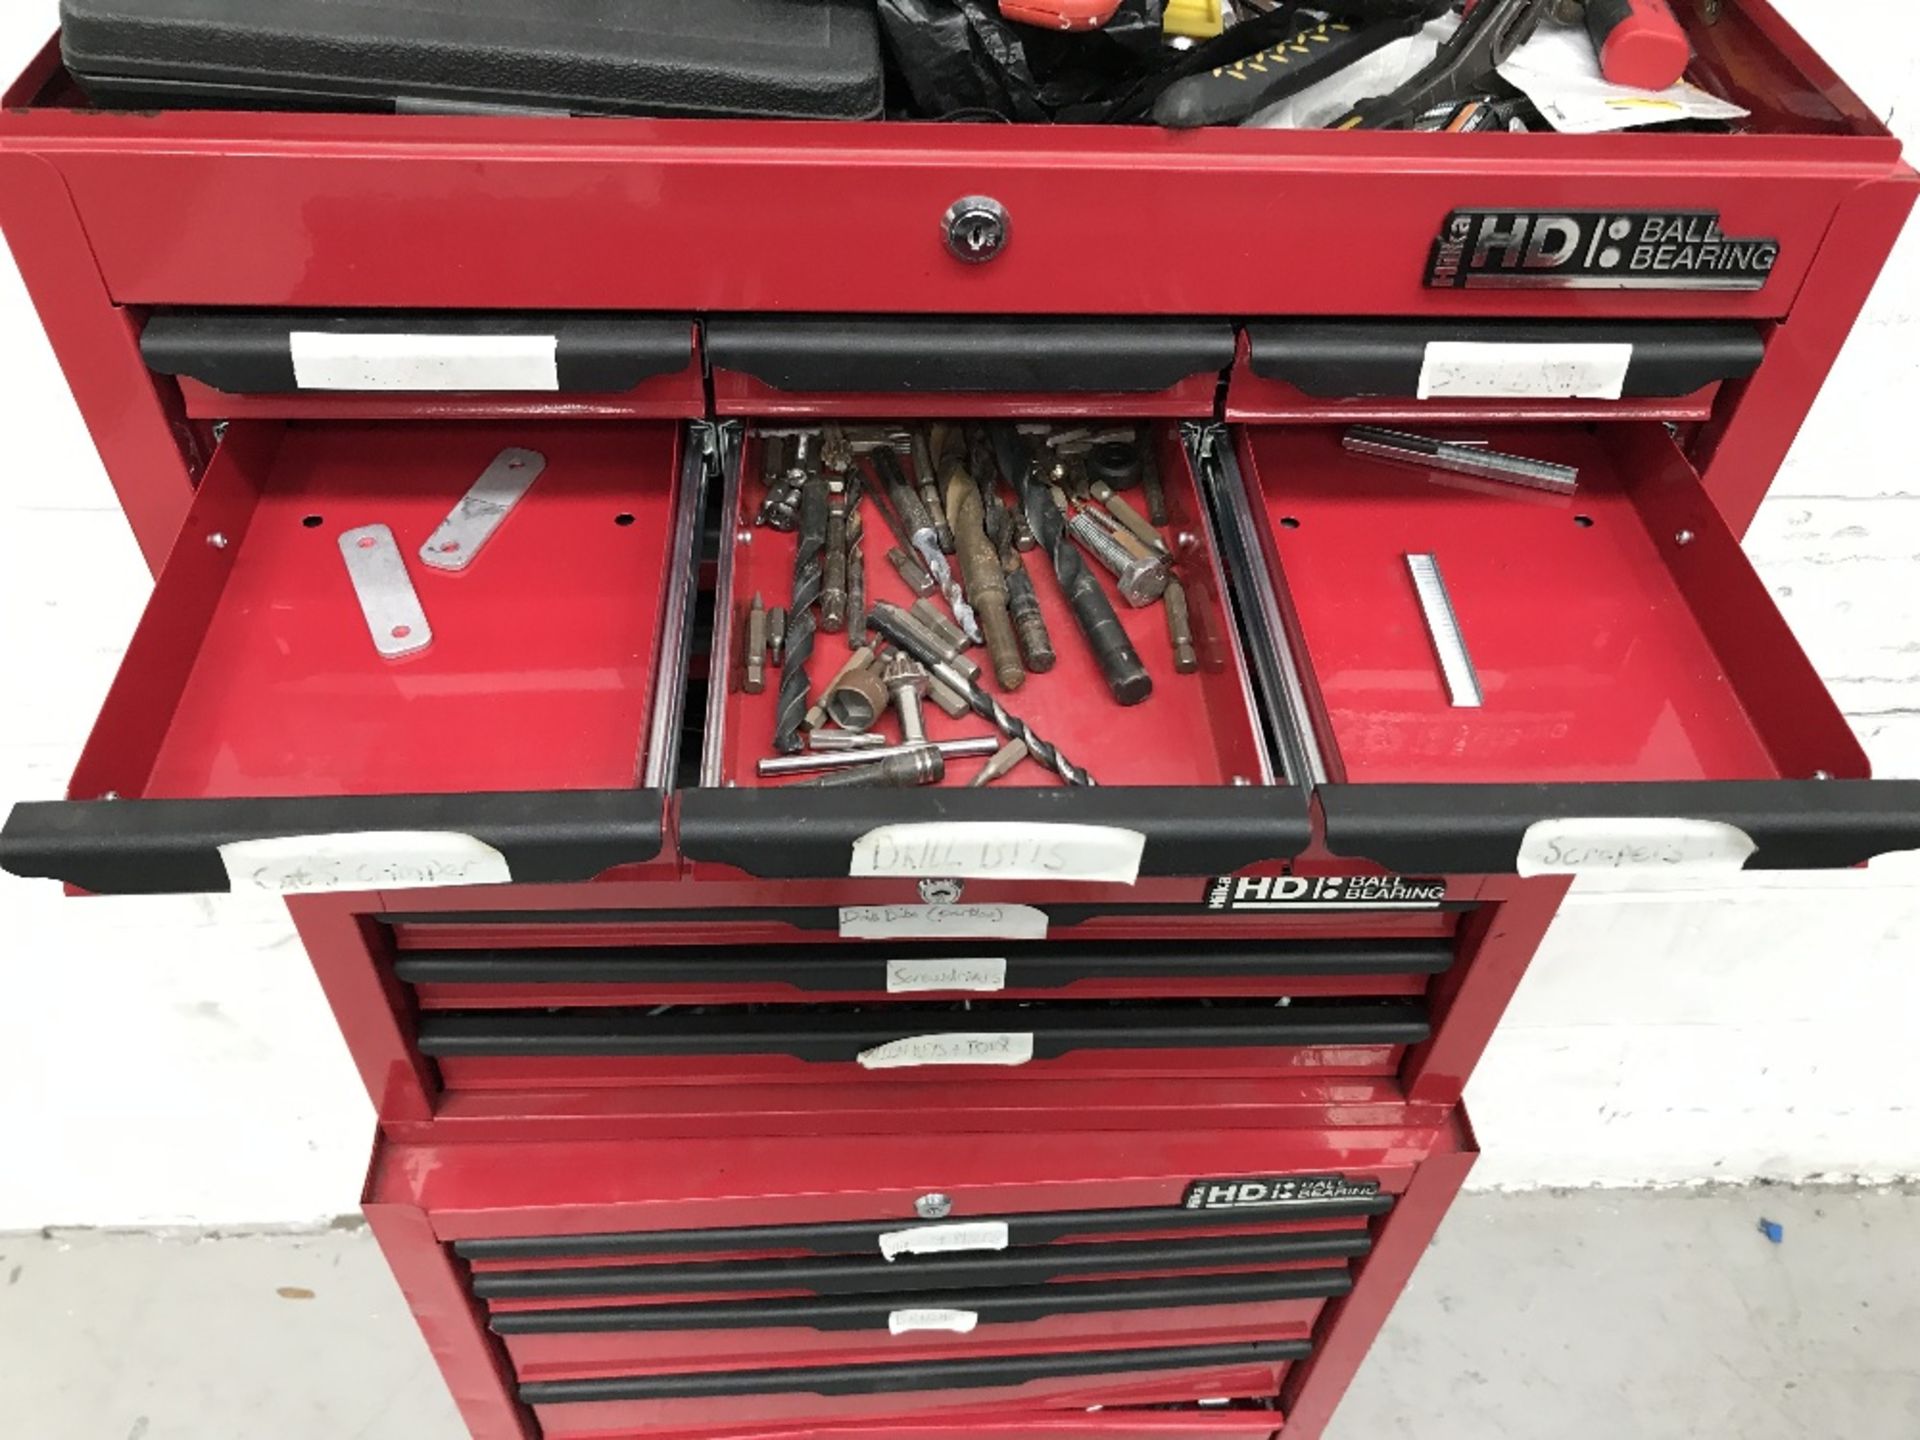 Hilka HD Ball Bearing Tool Chest and Contents - Image 4 of 13